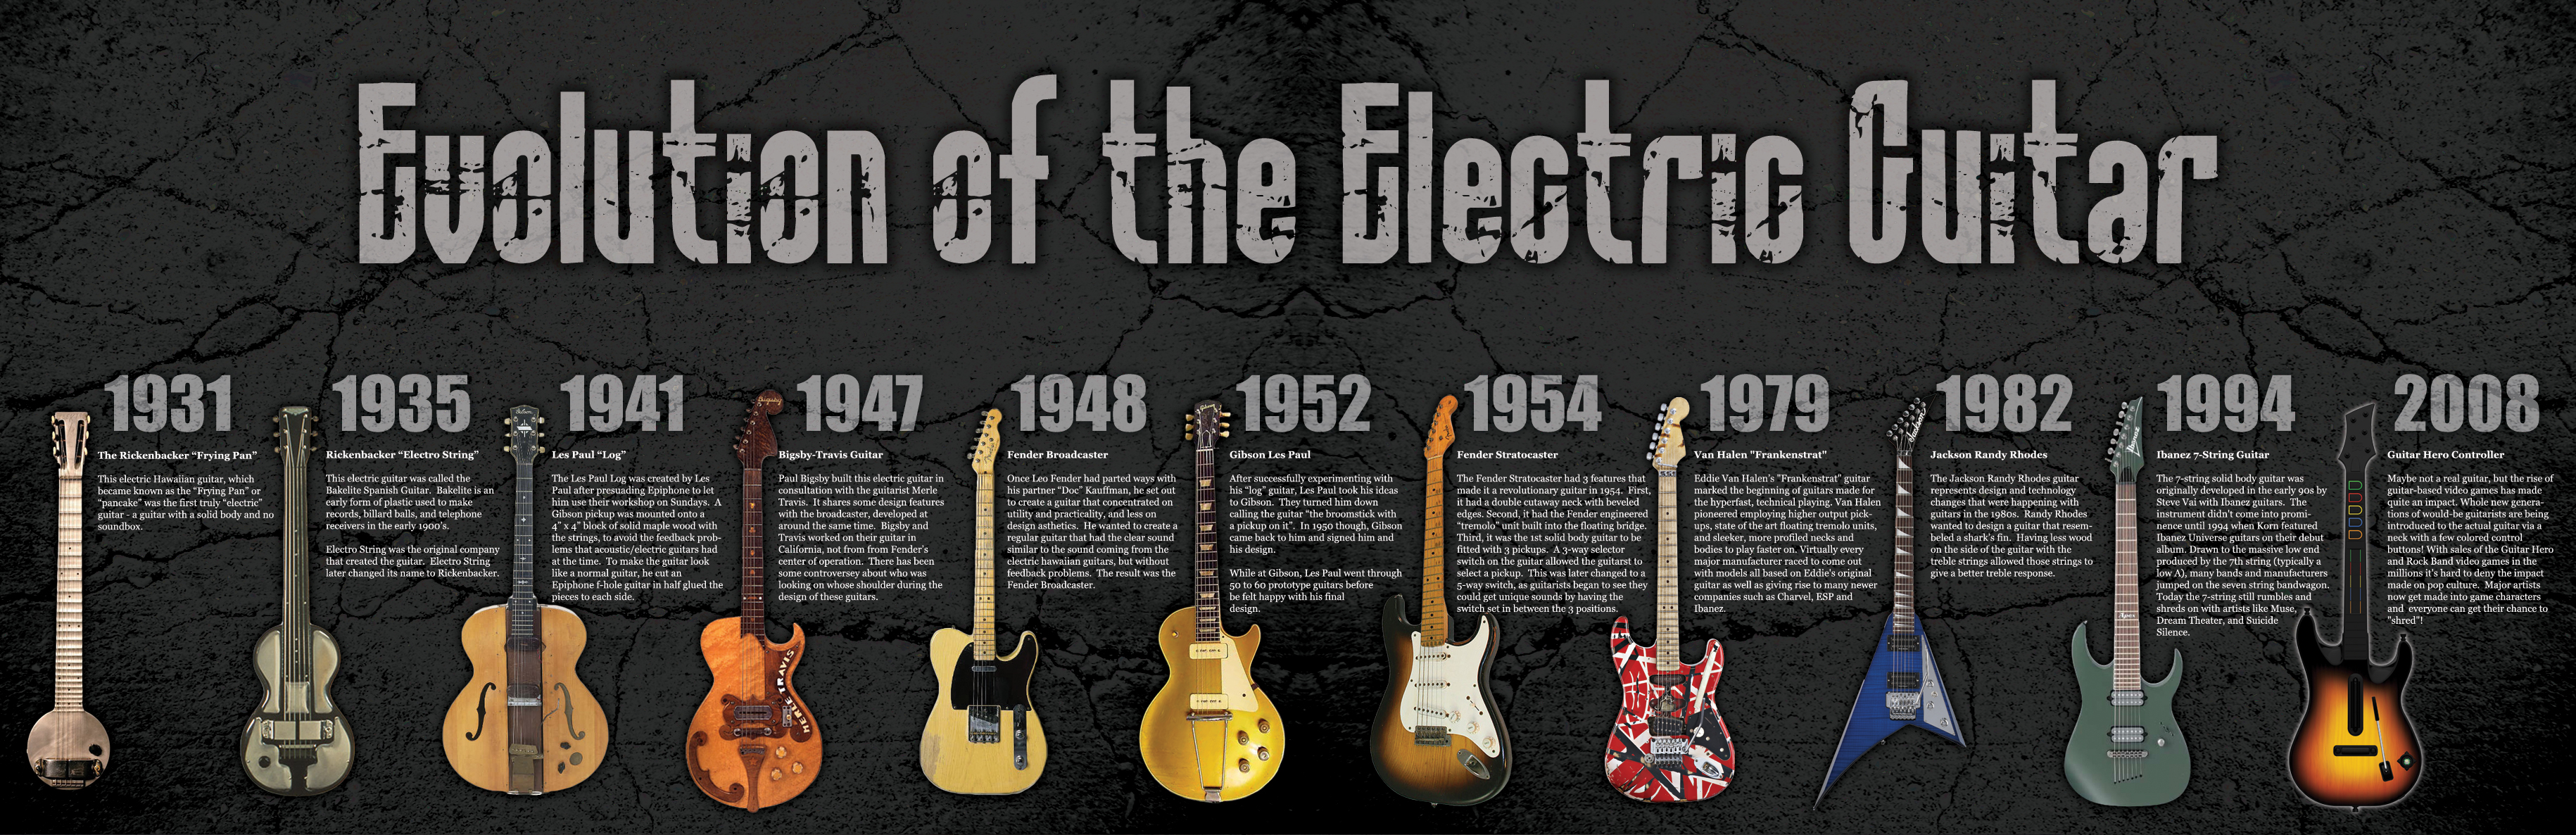 Evolution Of The Electric Guitar - Has The Guitar Changed Over Time - HD Wallpaper 